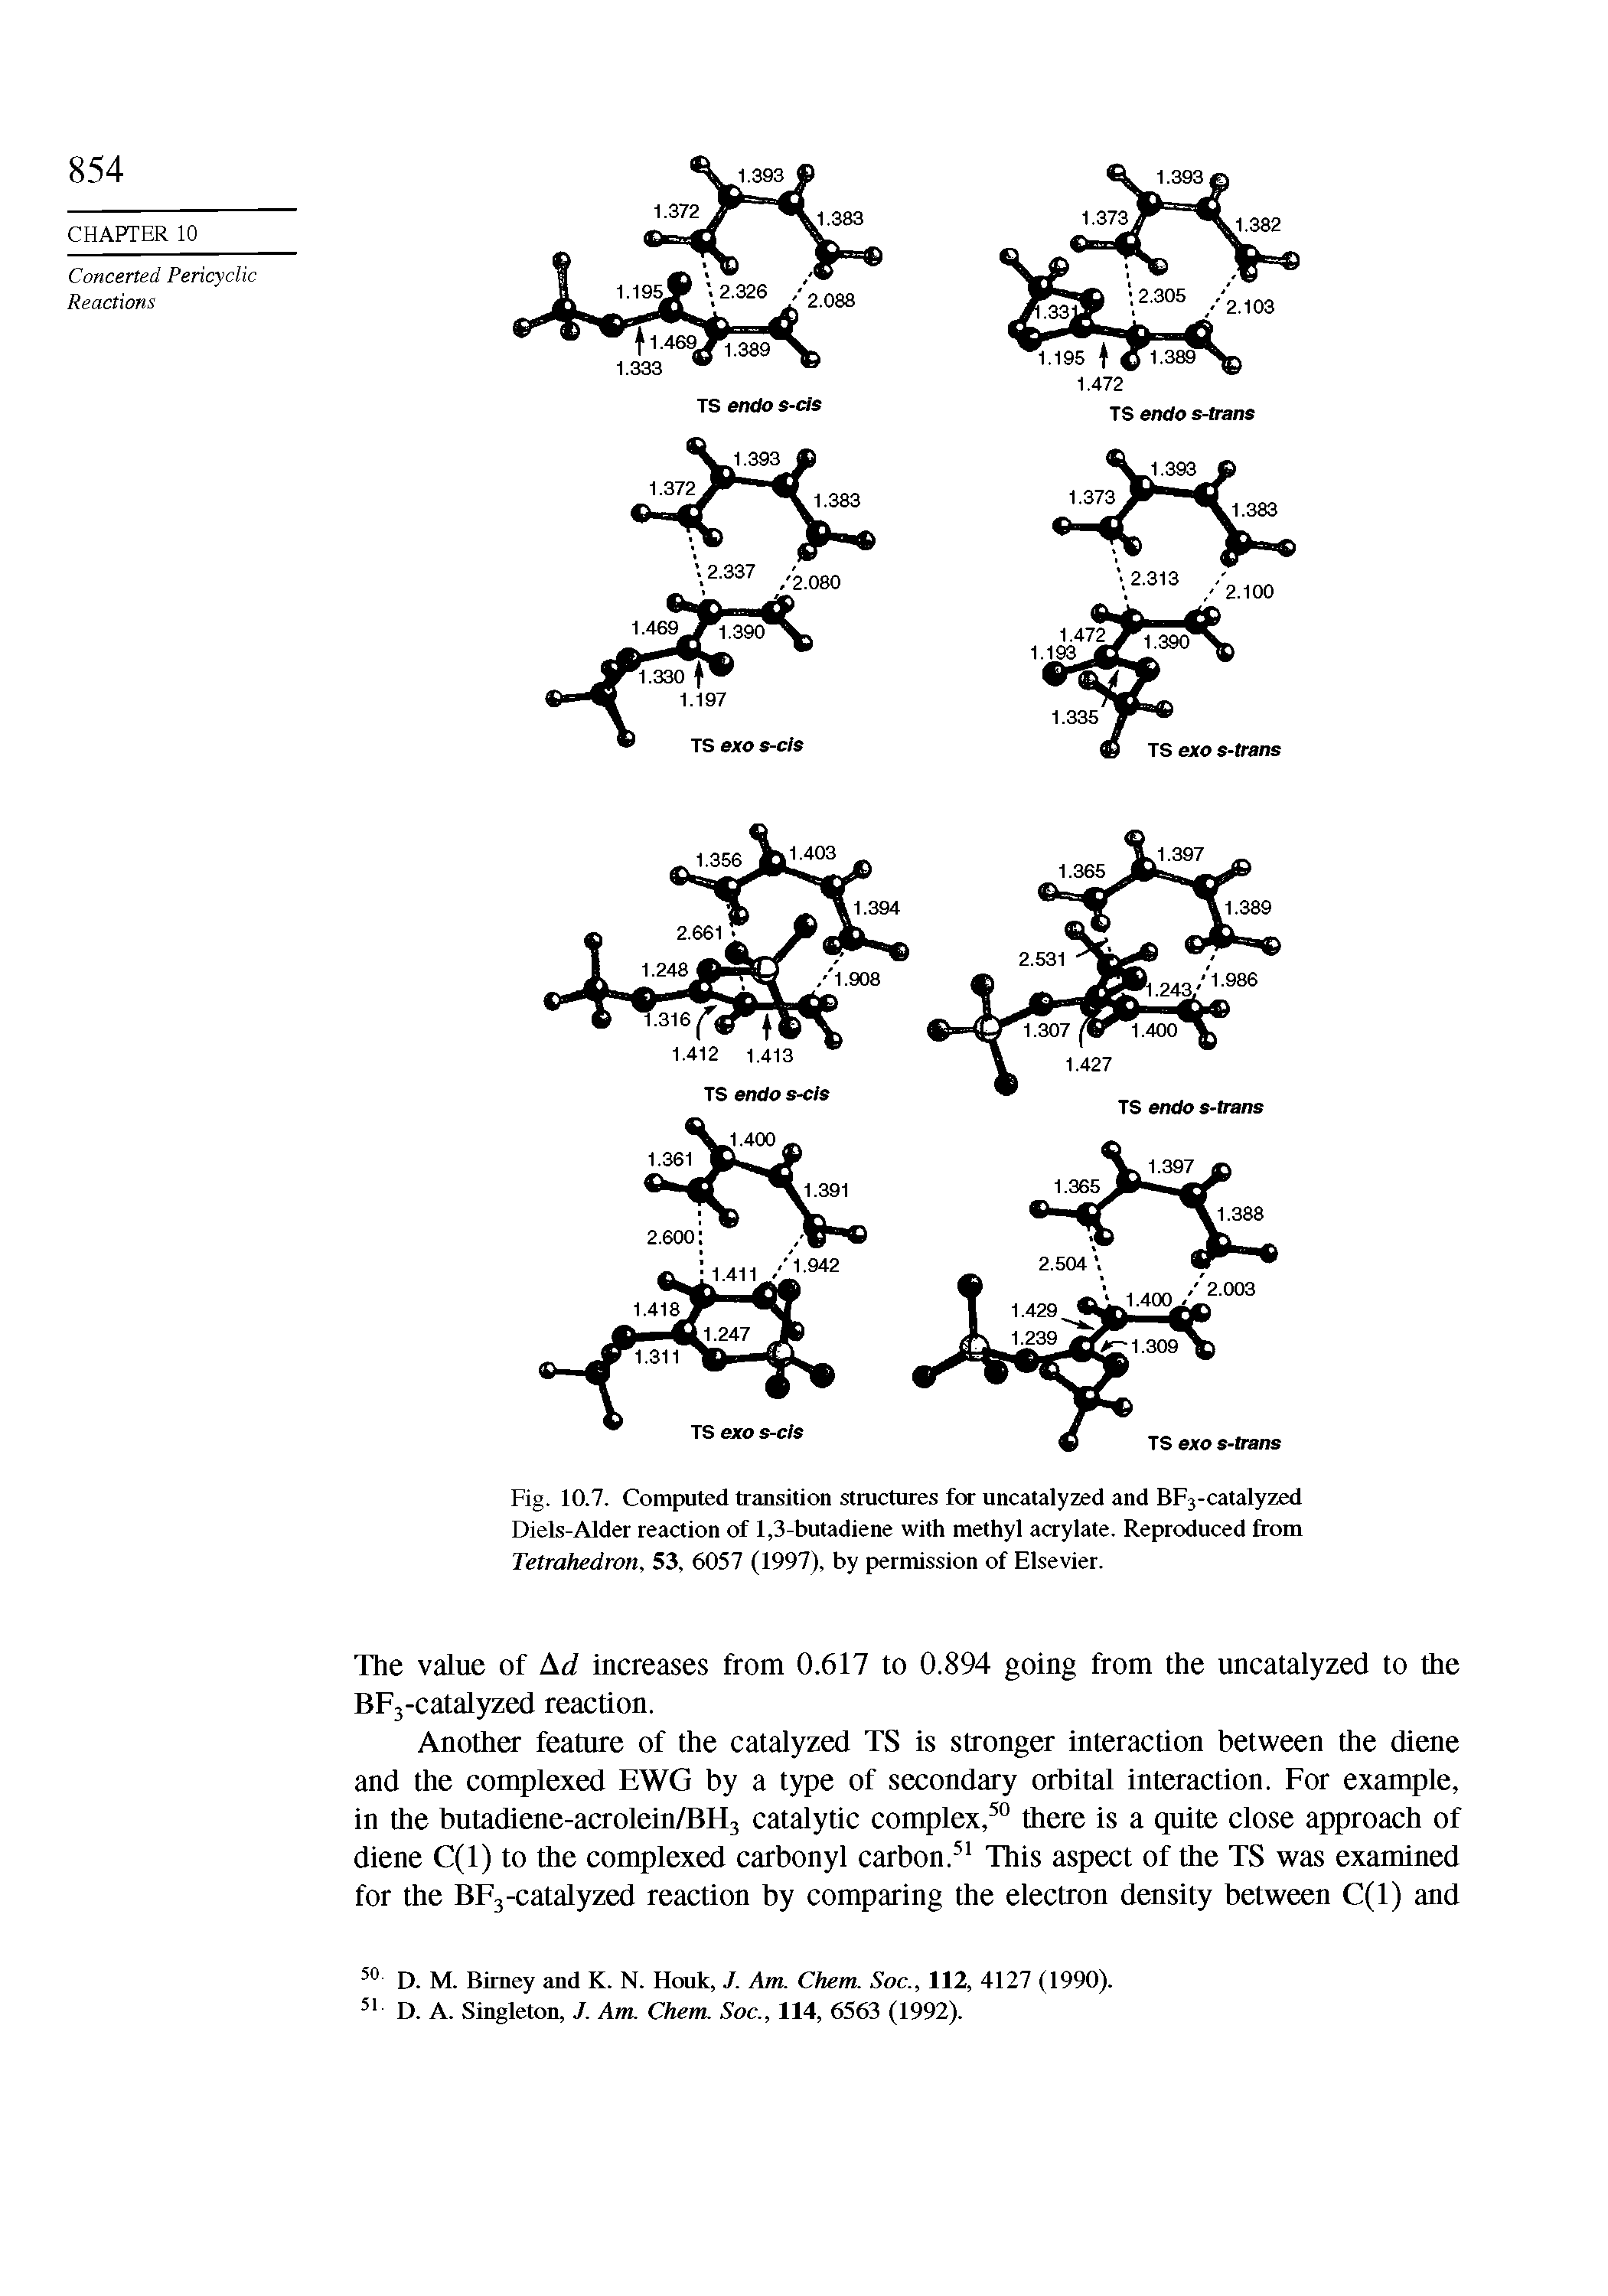 Fig. 10.7. Computed transition structures for uncatalyzed and BF3-catalyzed Diels-Alder reaction of 1,3-butadiene with methyl acrylate. Reproduced from Tetrahedron, 53, 6057 (1997), by permission of Elsevier.